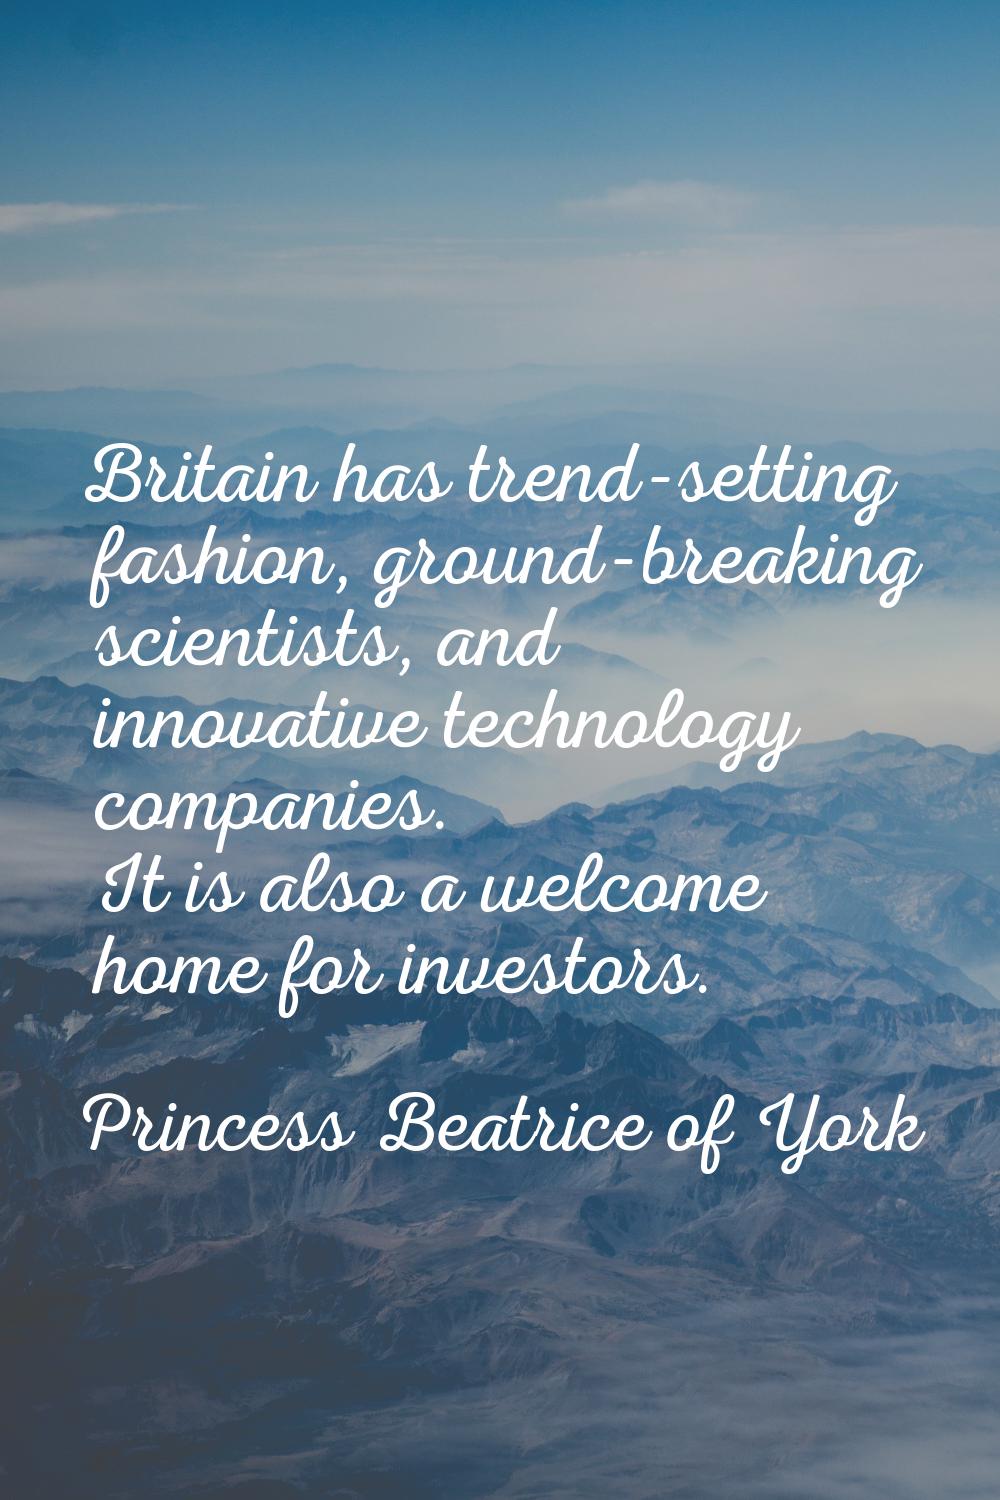 Britain has trend-setting fashion, ground-breaking scientists, and innovative technology companies.